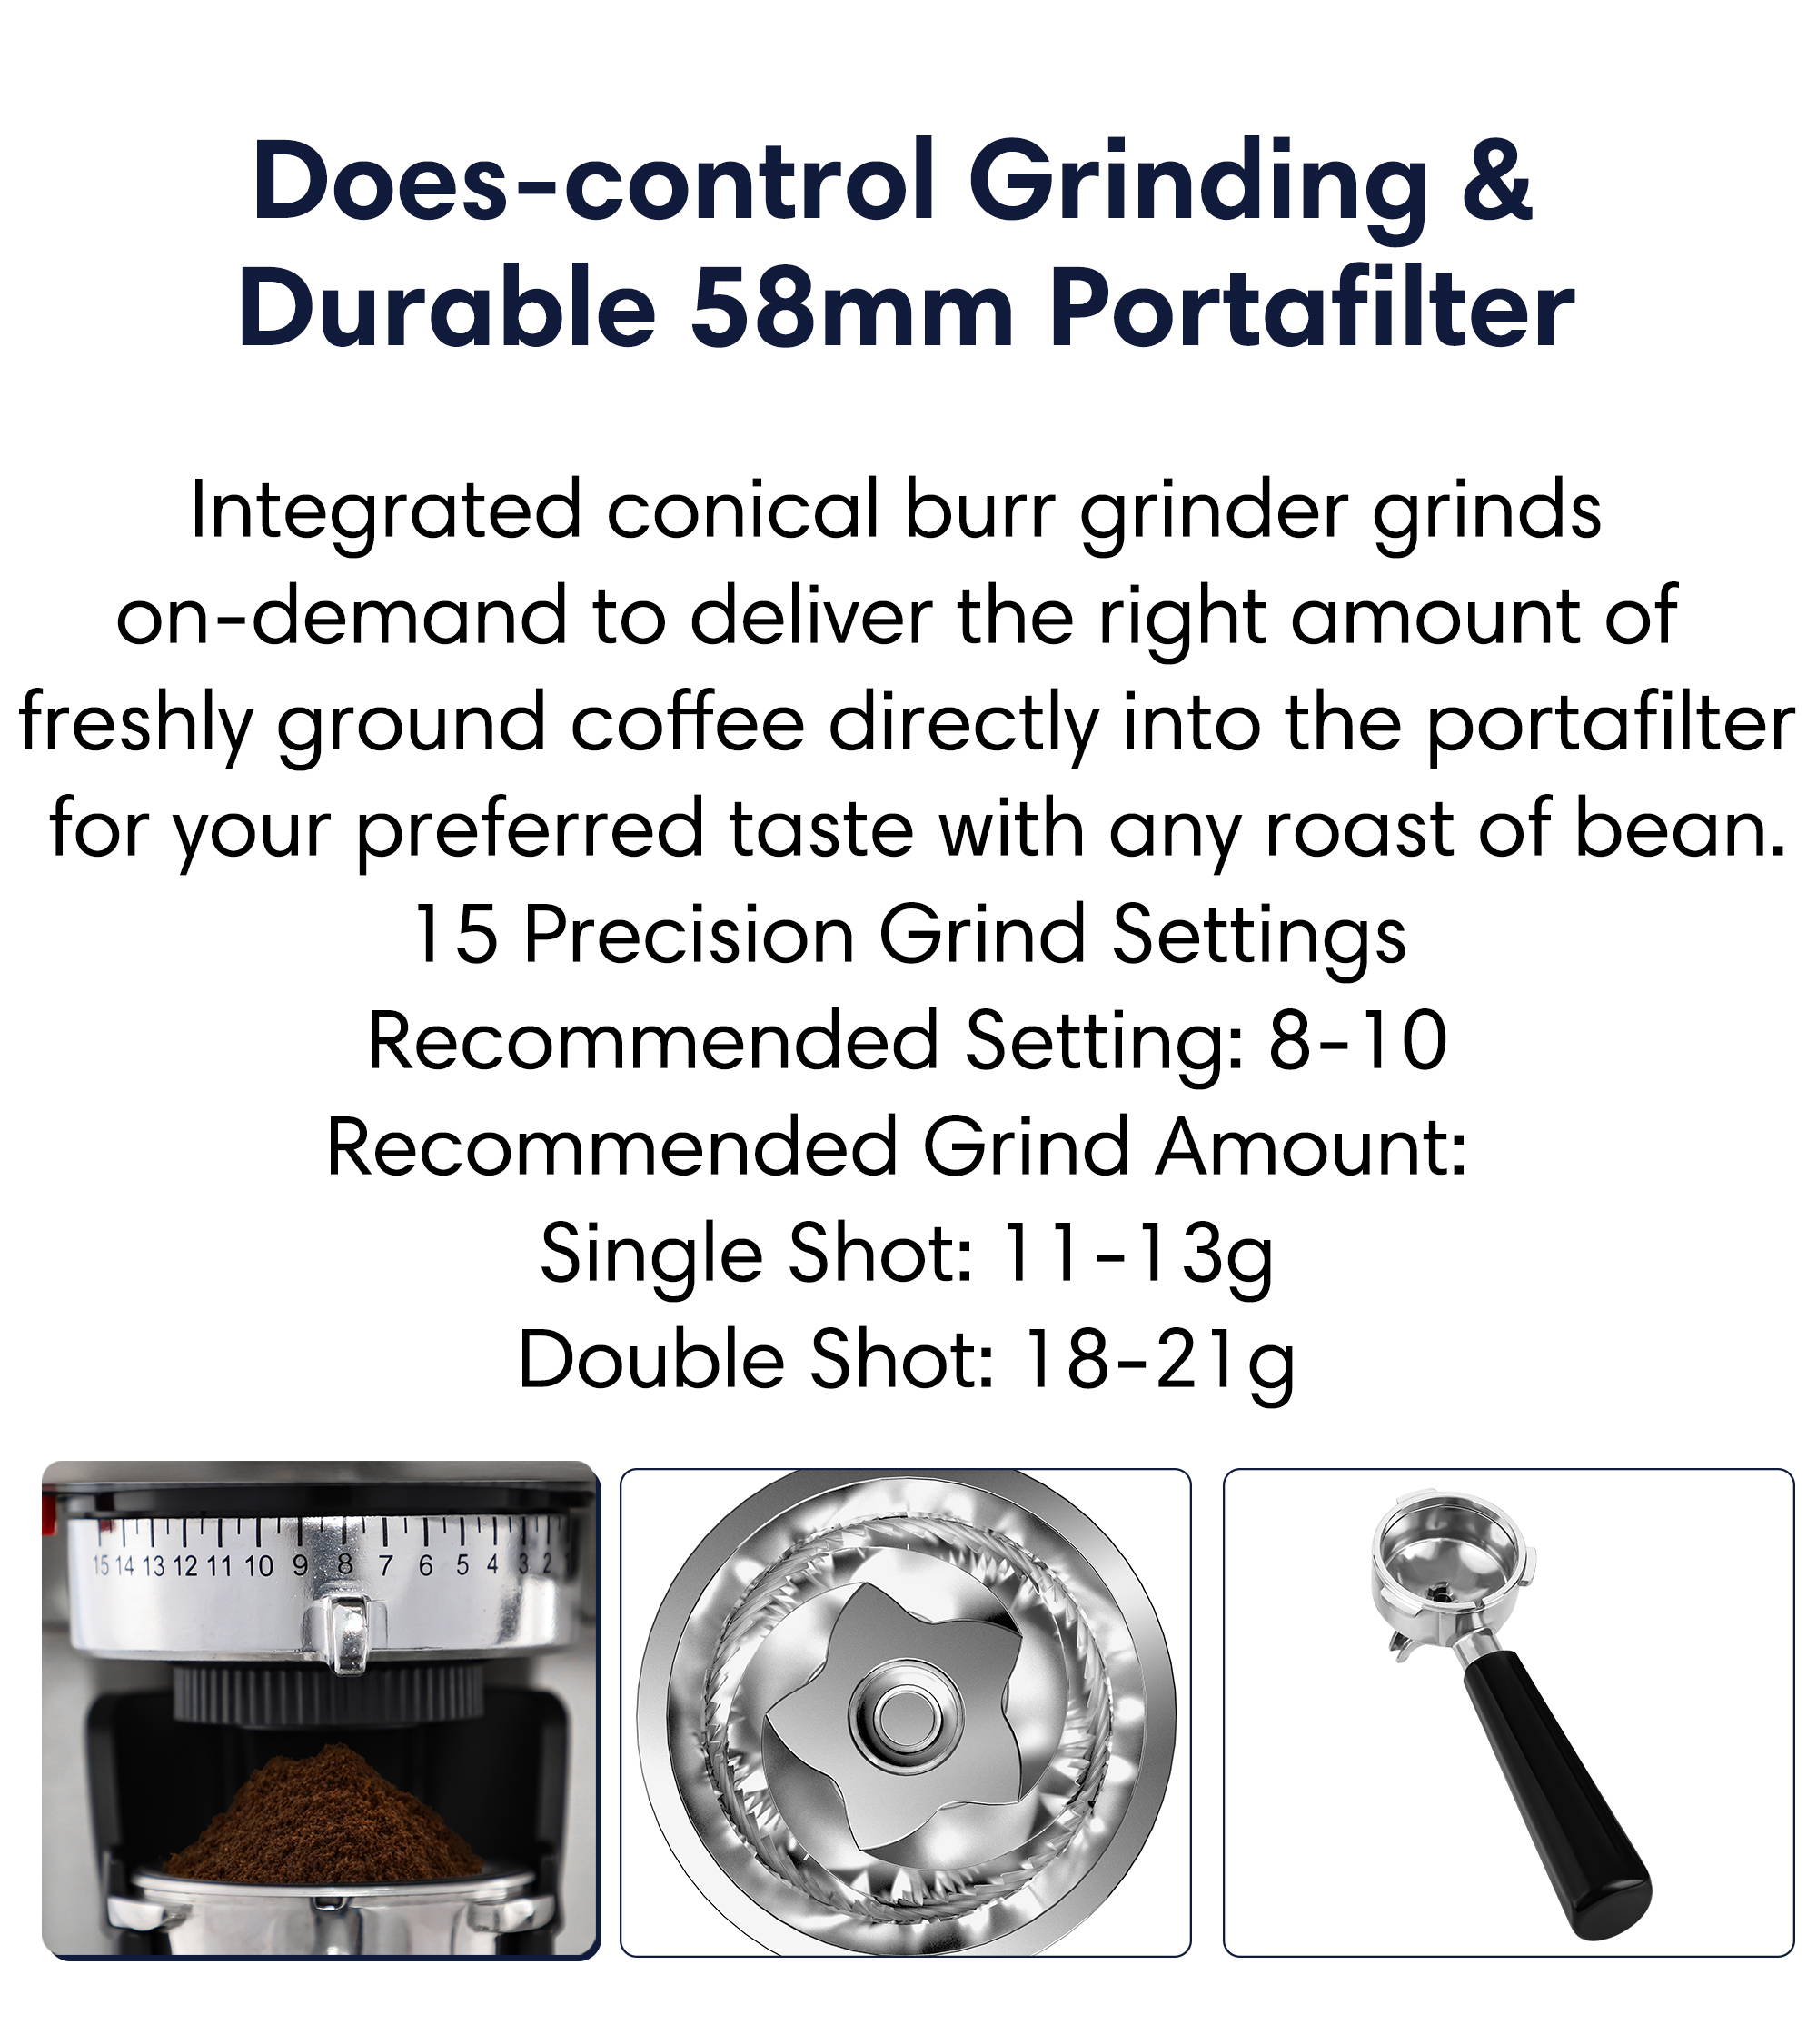 Does-control grinding and surable 58mm stainless steel portafilter  integrated conical burr grinder grinds on-demand to deliver the right amount of freshly ground coffee directly into the portafilter for your preferred taste with any roast of bean.